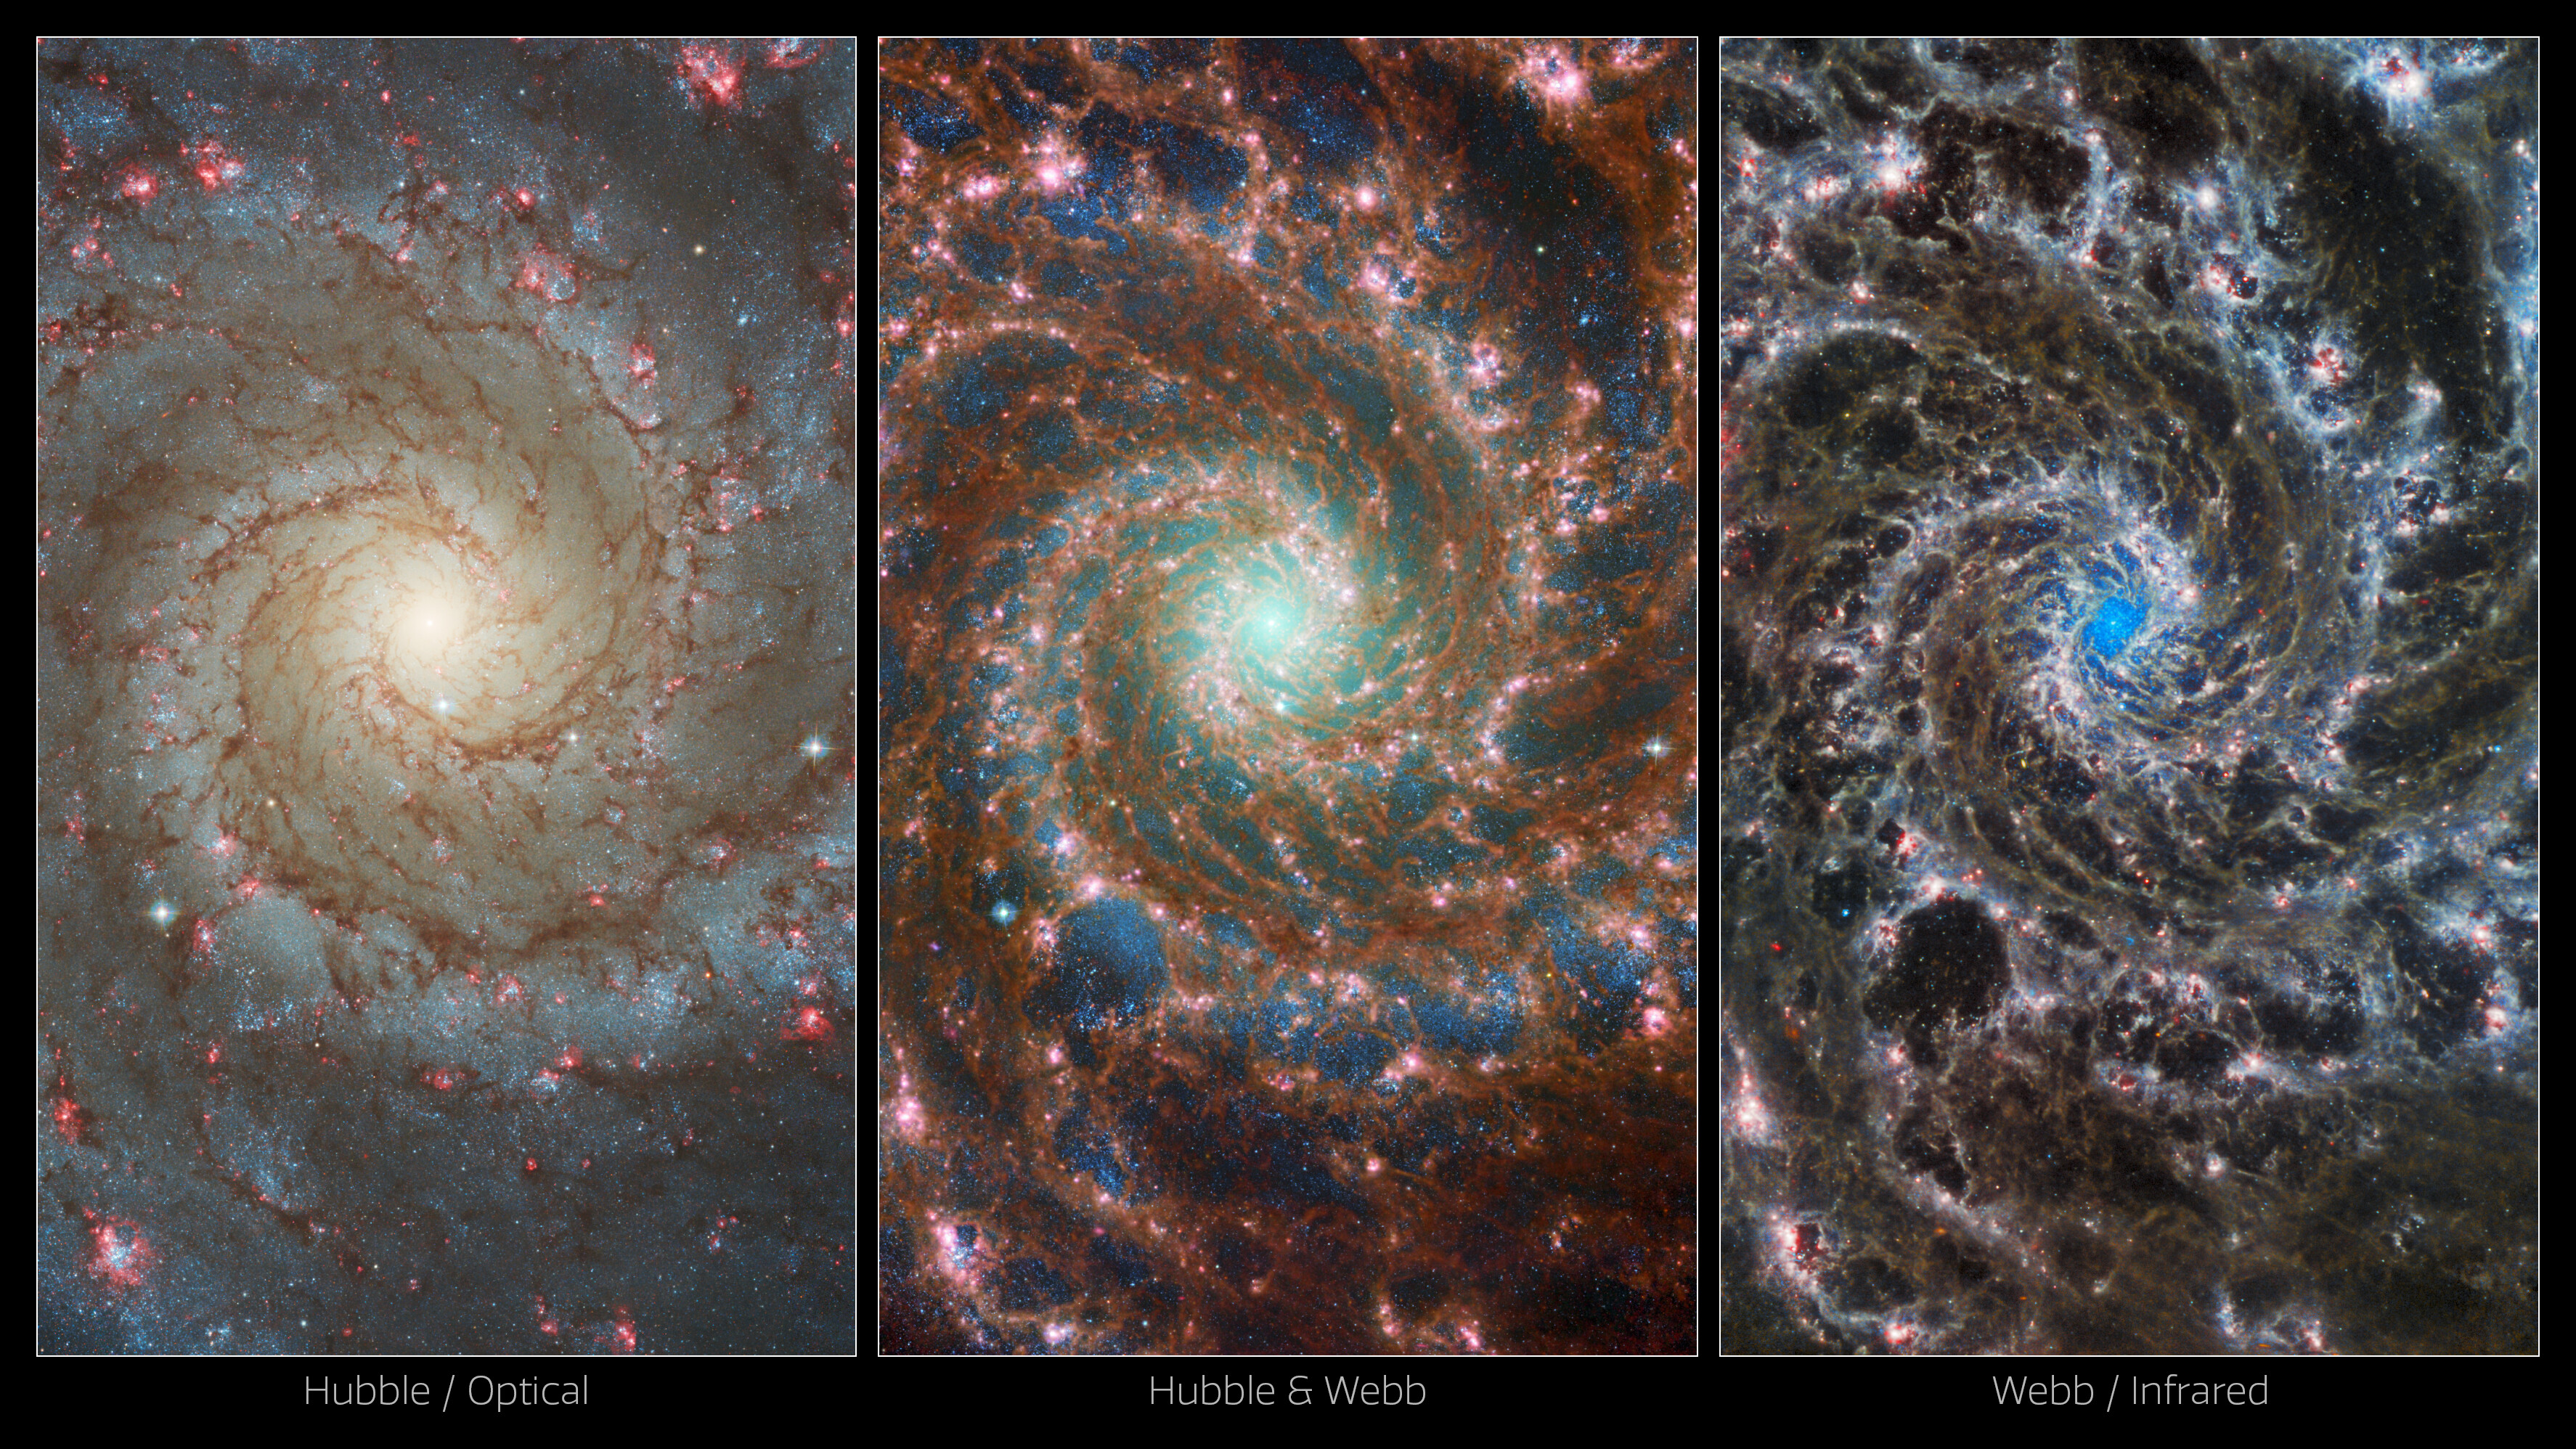 This image is divided evenly into 3 different views of the same region in the Phantom Galaxy. At left is an optical view taken by Hubble. Arms carved of brown filaments spiral out from a bright galactic core. The arms have pops of pink, which are star-forming regions, and there are blue stars throughout. The middle view contained combined Webb and Hubble data. Lacy red filaments spiraling out of the center of the galaxy are overlaid over a black field speckled with tiny blue stars. The red filaments contain pops of bright pink, which are star-forming regions. Lighter oranges in the red dust mean that dust is hotter. Heavier older stars closer to the center of the galaxy are cyan and green, and contribute to a greenish glow at the core. At right is a mid-infrared image from Webb. Delicate gray filaments spiral outwards from the center. These arms are traced by blue and bursts of pink, which are star-forming regions. A cluster of young stars glow blue at the very heart of the galaxy.